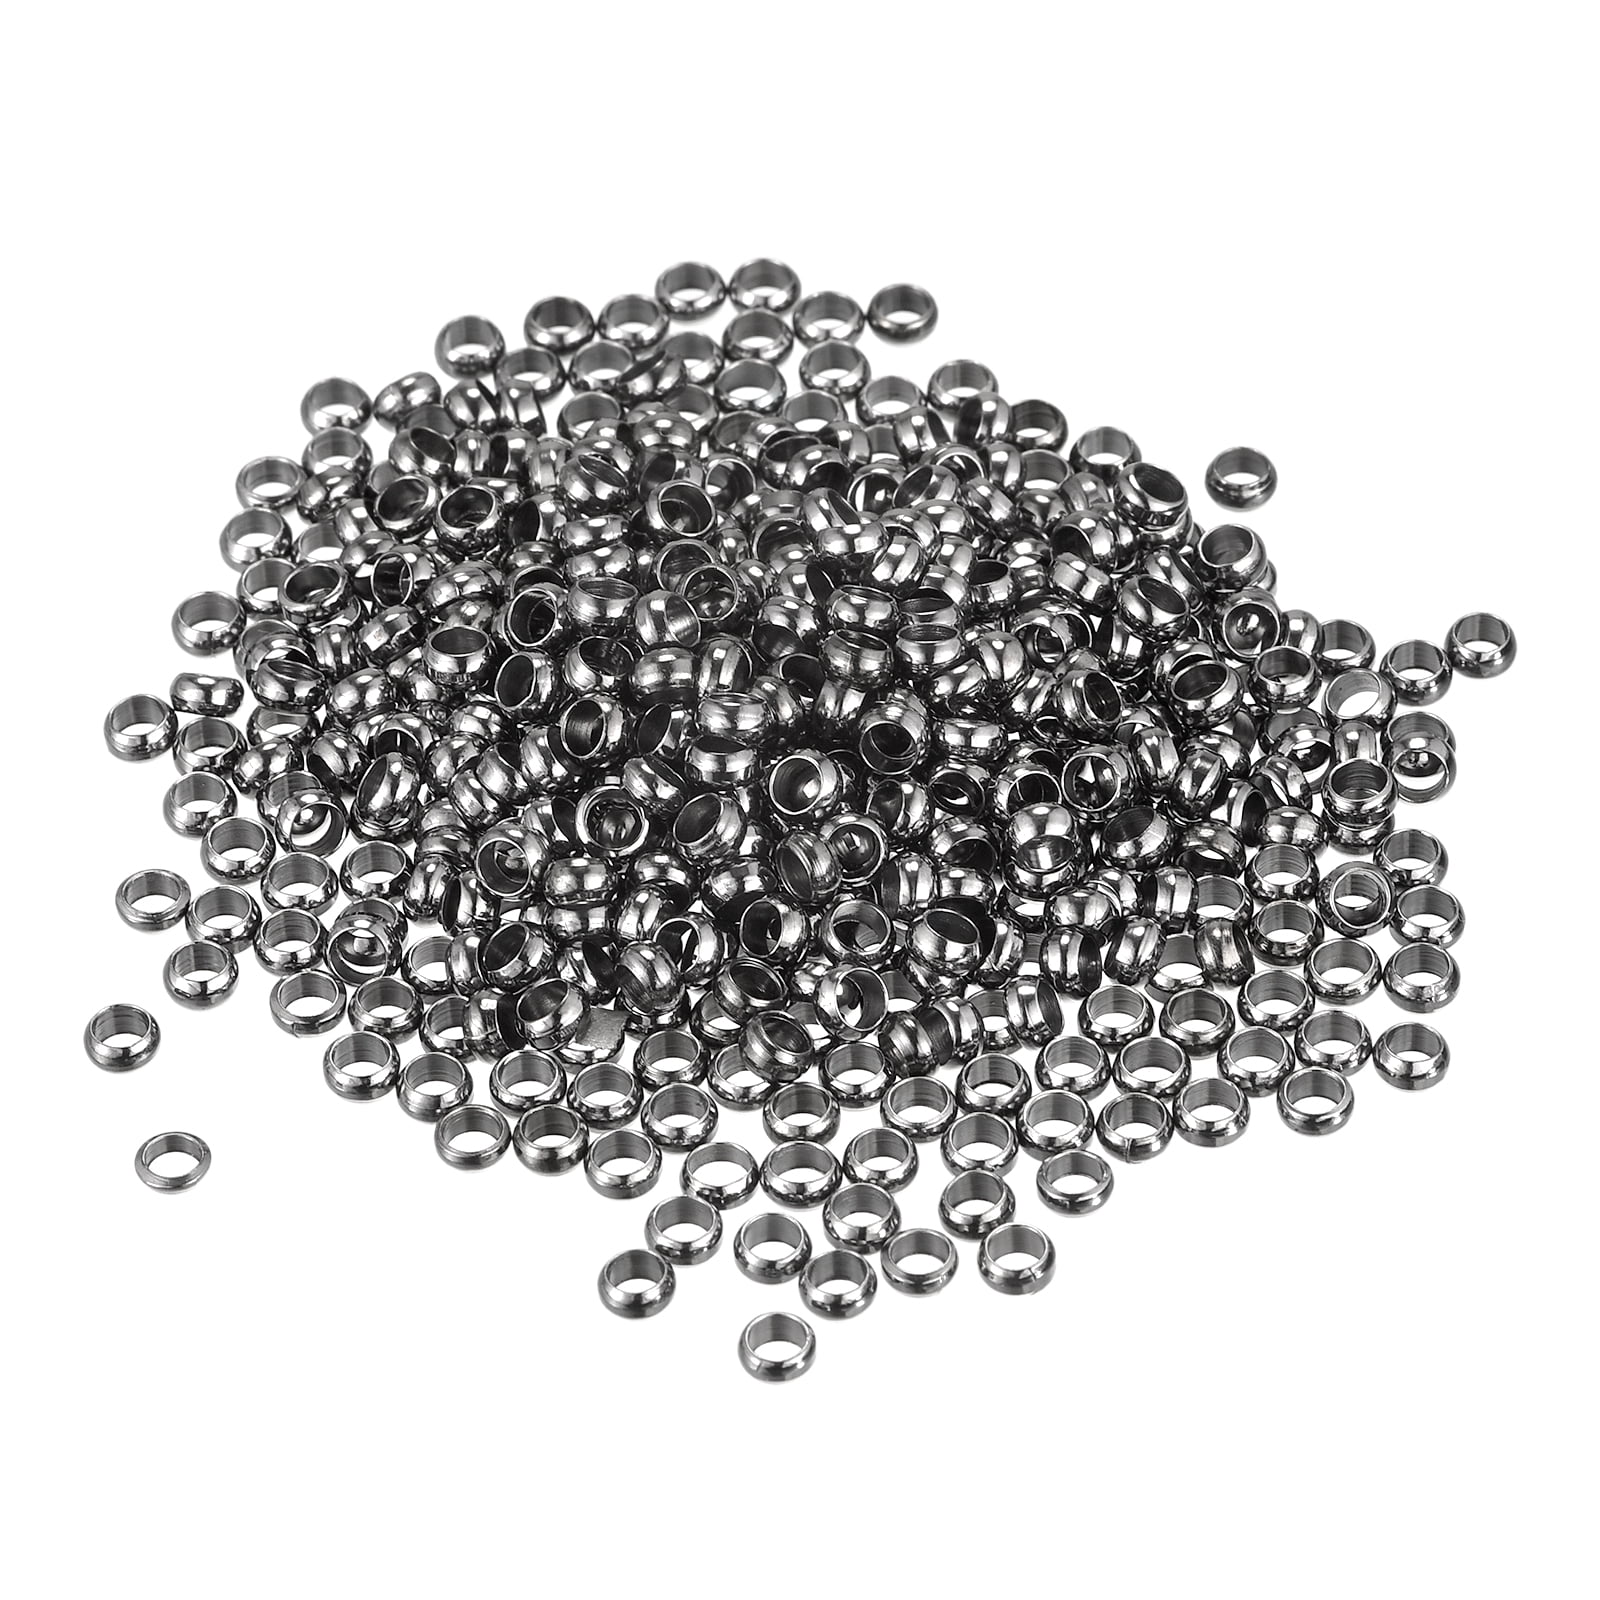 3mm Shiny Silver Stardust Metal Crimp Beads 24pc by hildie & jo